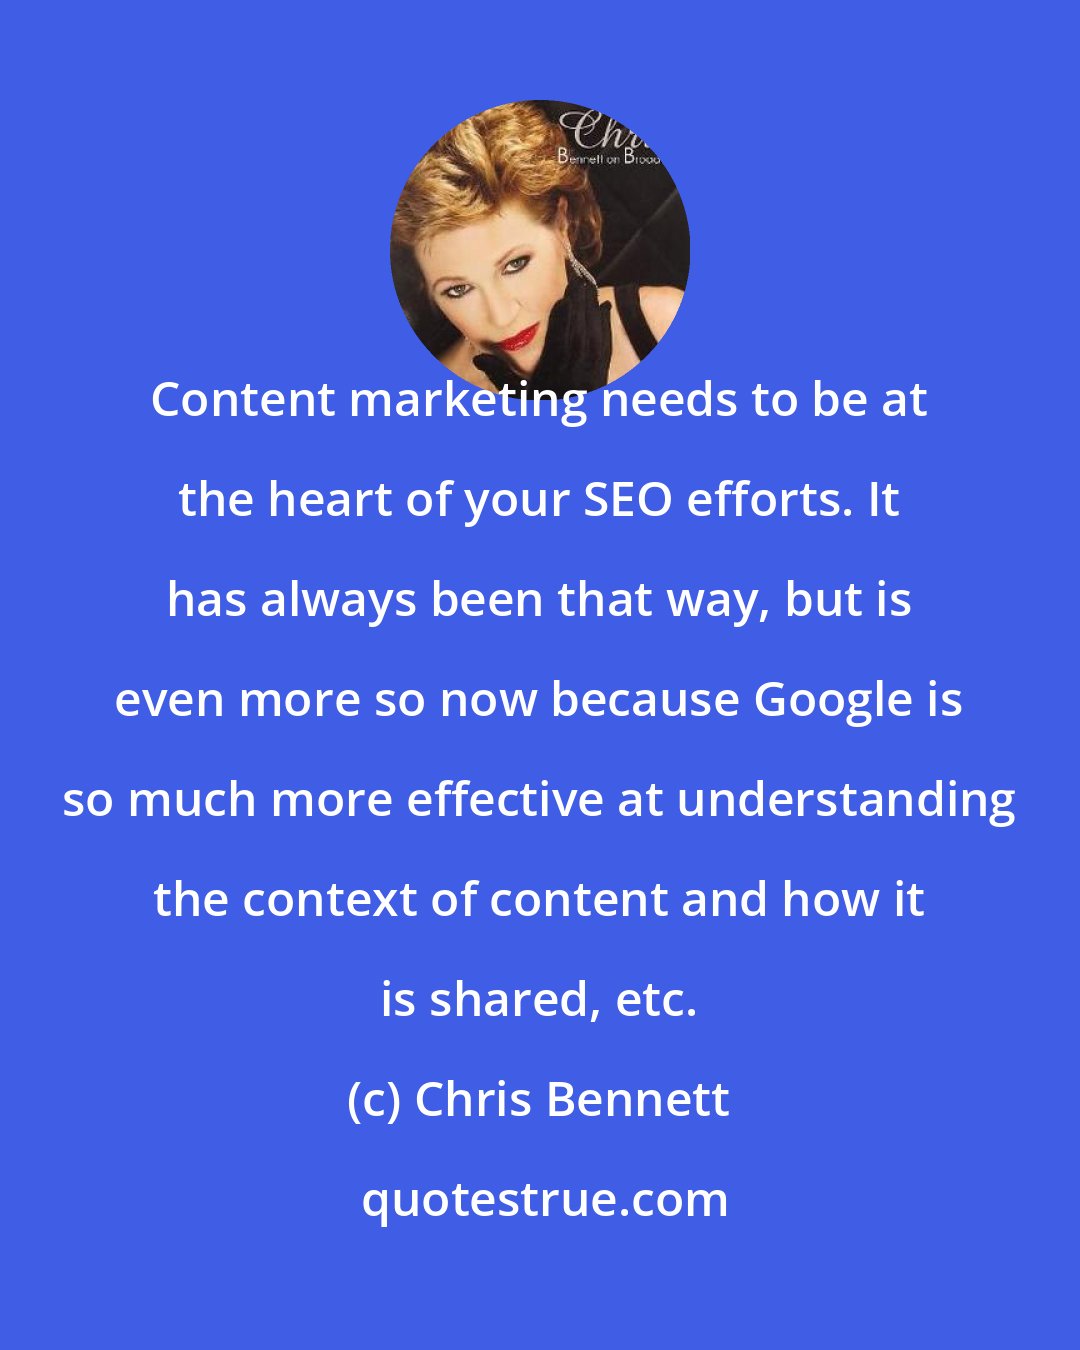 Chris Bennett: Content marketing needs to be at the heart of your SEO efforts. It has always been that way, but is even more so now because Google is so much more effective at understanding the context of content and how it is shared, etc.